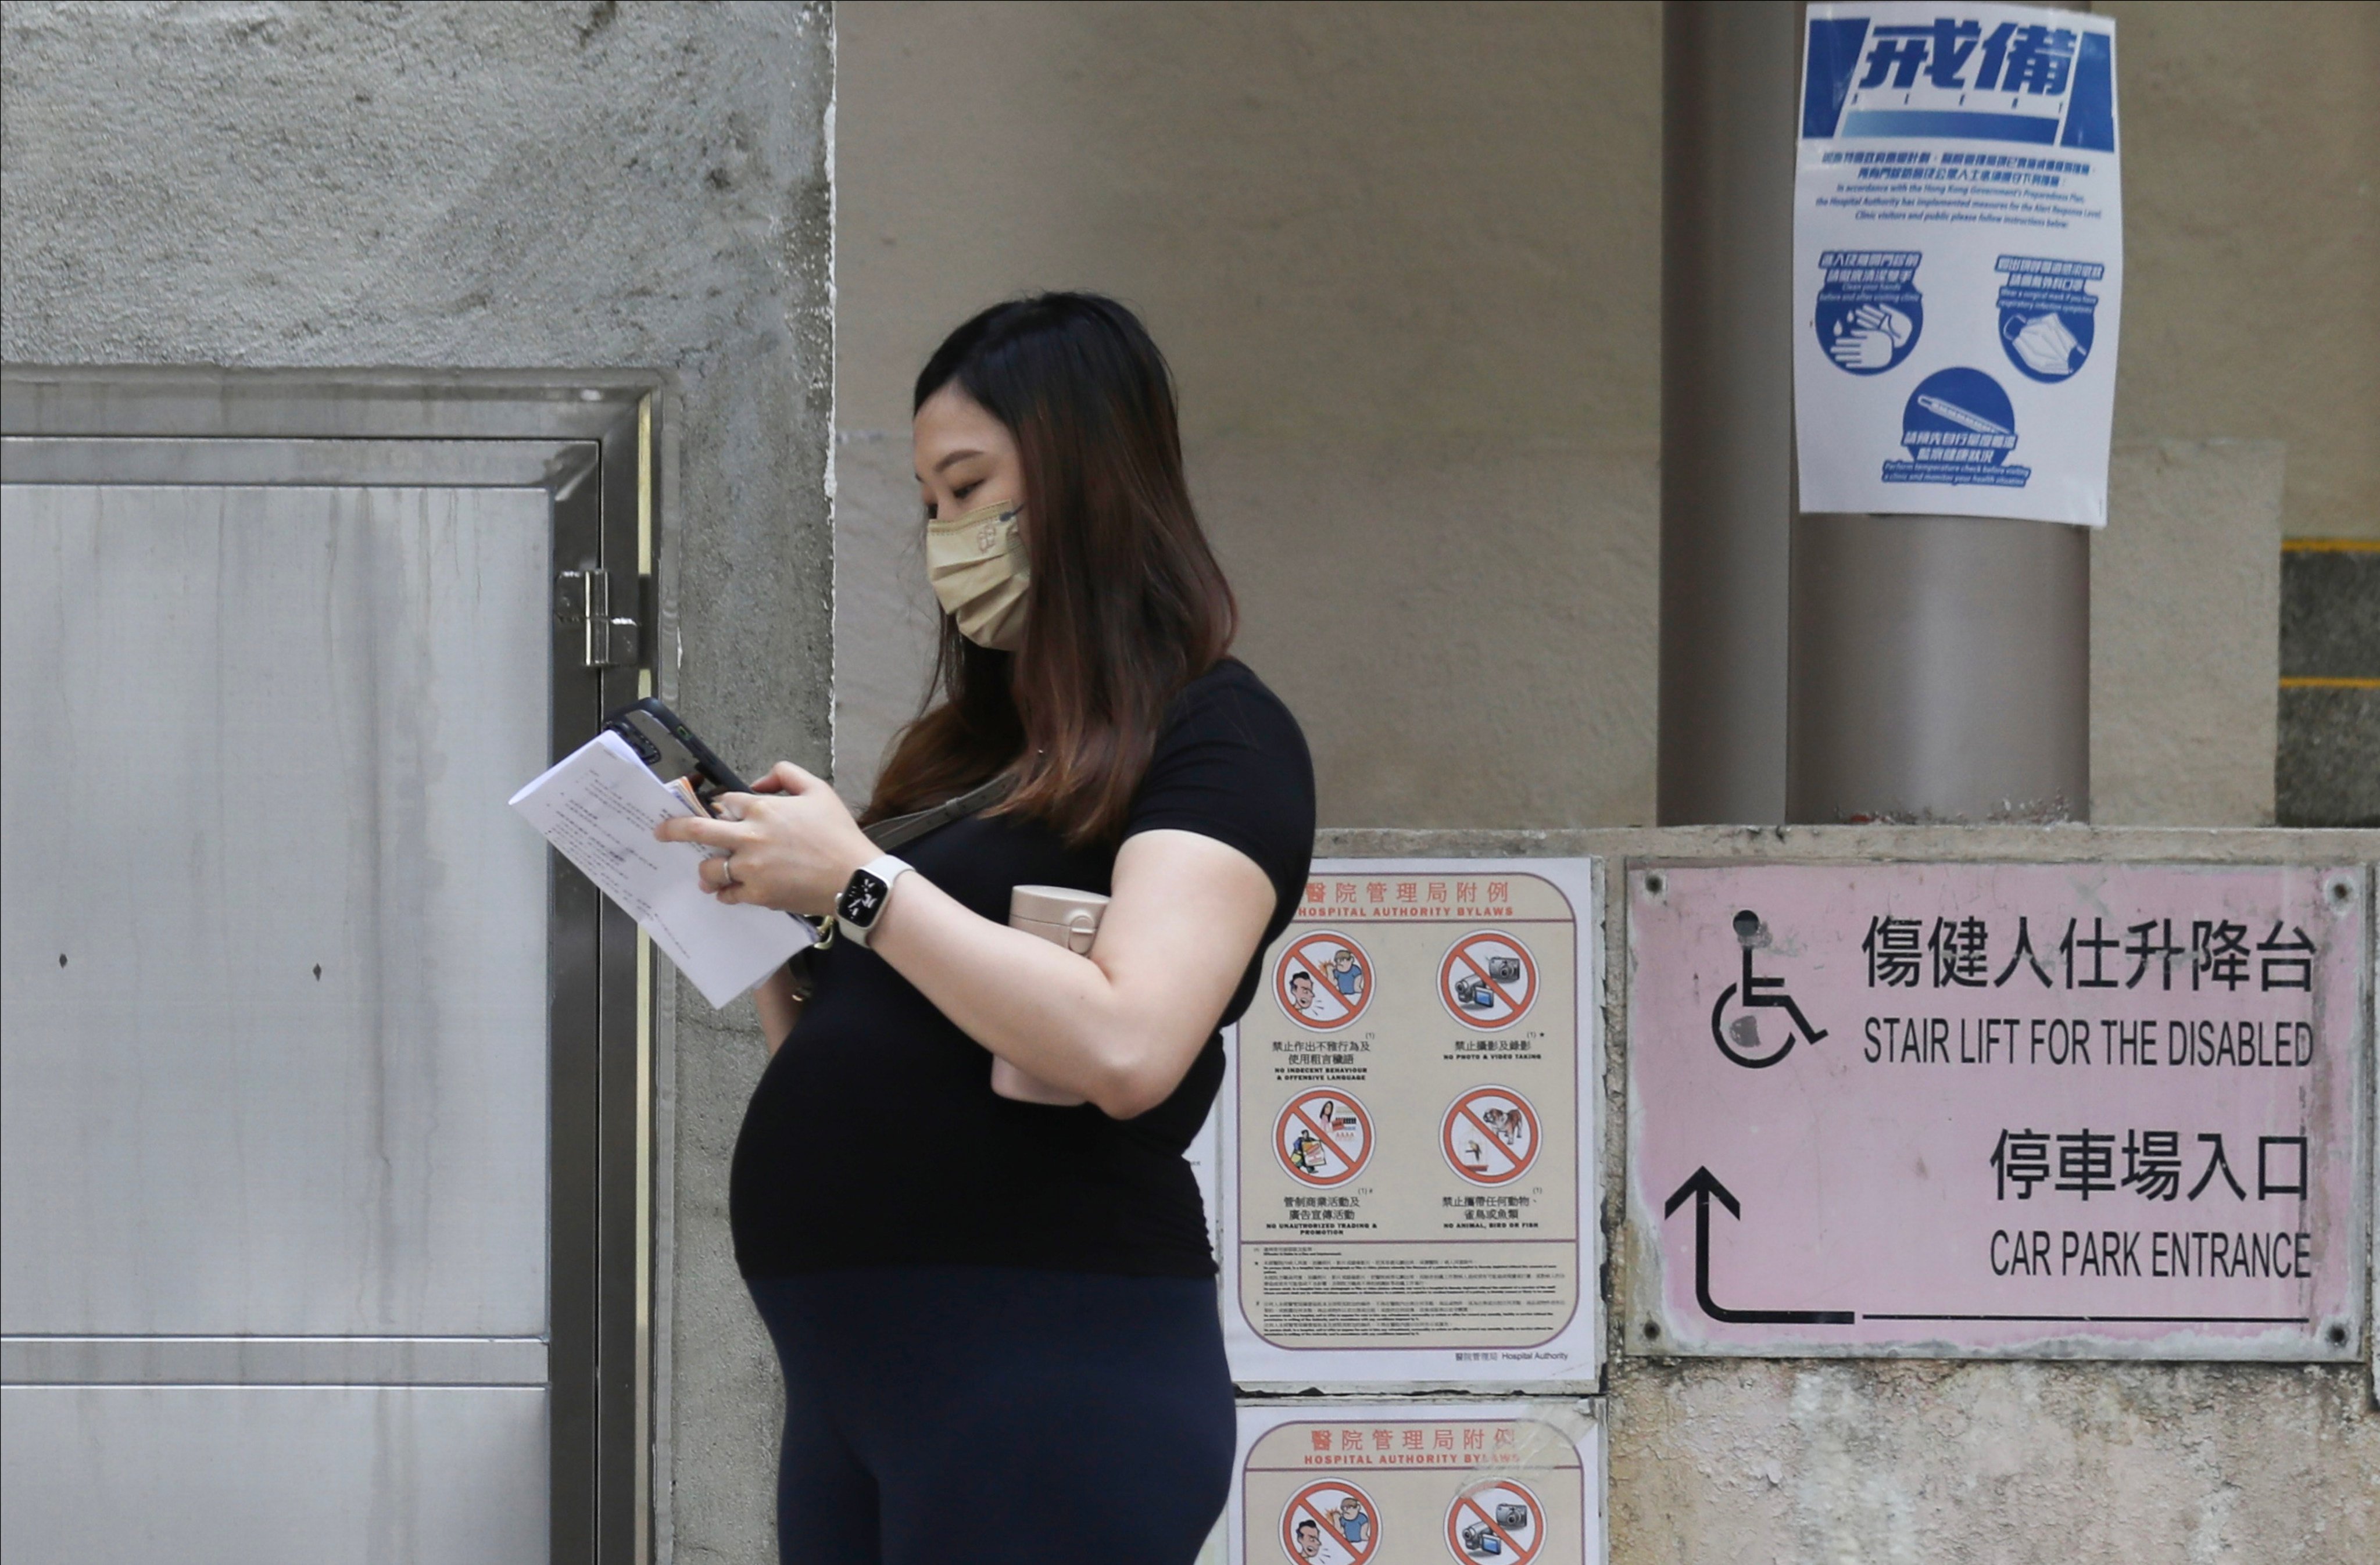 Women planning pregnancy should consider their holistic risk profile rather than focusing solely on gestational diabetes, researchers say. Photo:  Xiaomei Chen